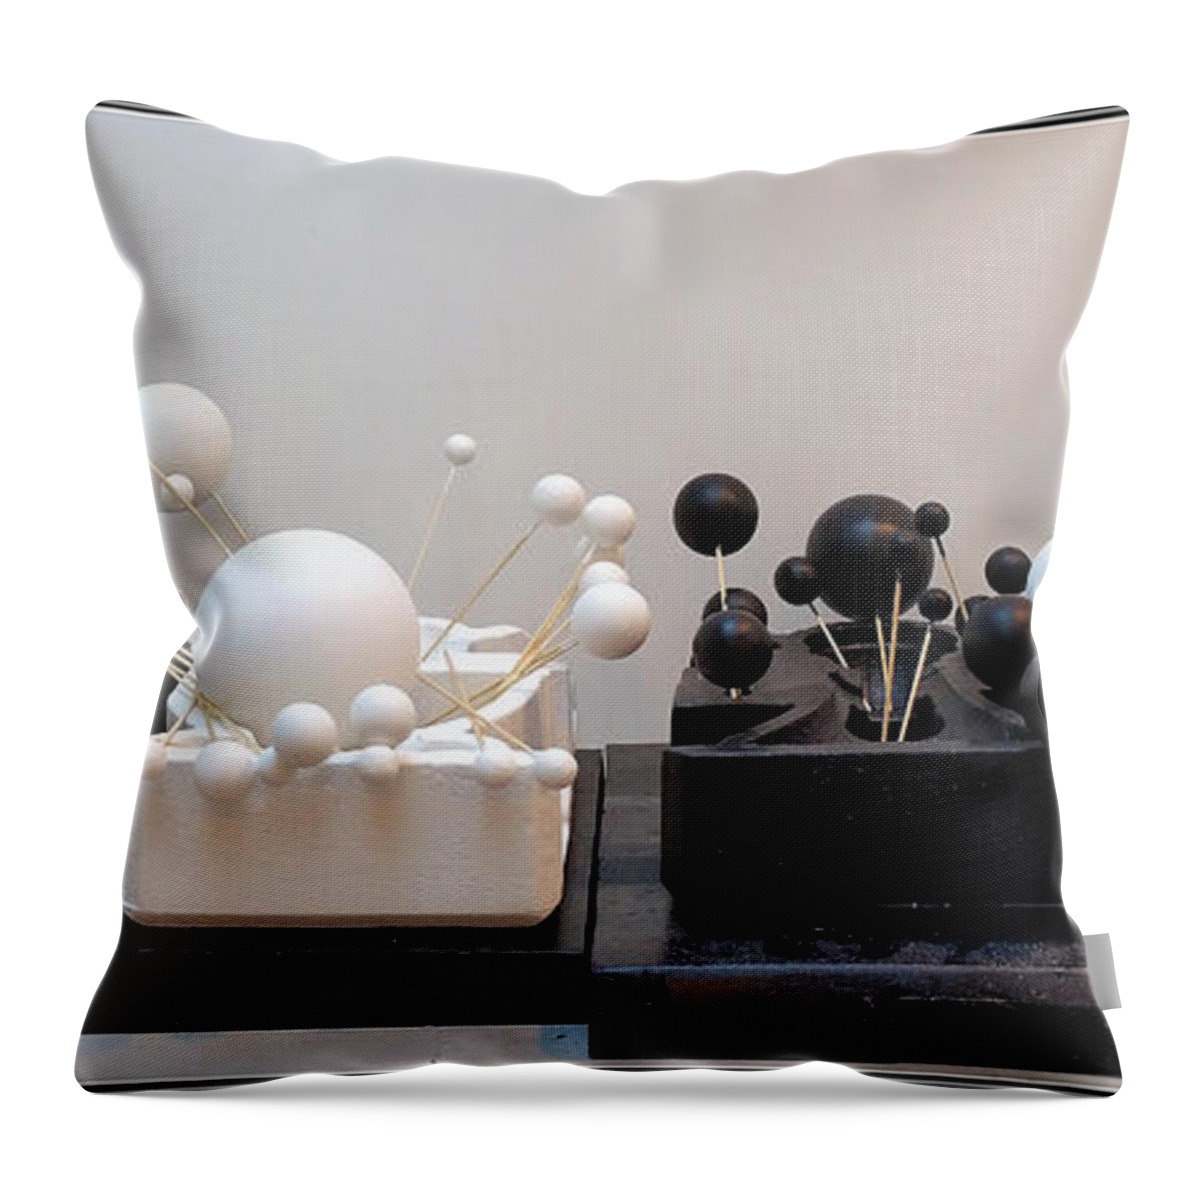  Throw Pillow featuring the painting Willendorf Wedding by James Lanigan Thompson MFA